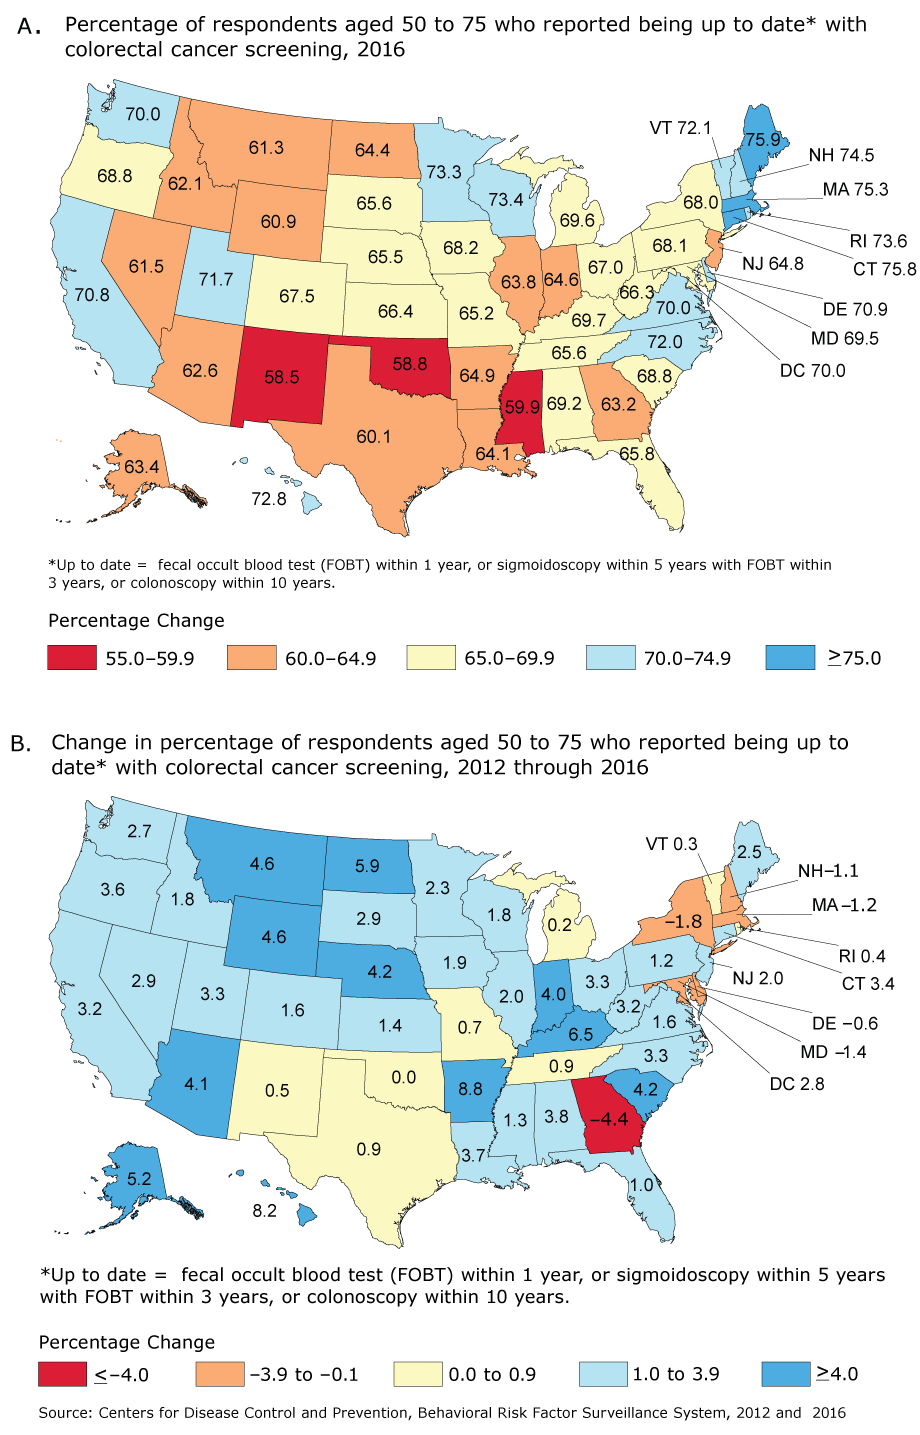 Progress toward increased use of colorectal cancer (CRC) screening tests, by state. A. Percentage of respondents aged 50 to 75 who reported being up to date with CRC screening in the 2016 Behavioral Risk Factor Surveillance System (1). The percentage up to date for the United States overall was 67.3%26#37;. B. The absolute change in percentage of respondents aged 50 to 75 who reported being up to date with CRC screening from 2012 through 2016, by state, Behavioral Risk Factor Surveillance System, 2012 (2), 2016 (1). Up to date is defined as having had a fecal occult blood test (FOBT) within the past year, sigmoidoscopy within the past 5 years with FOBT within the past 3 years, or colonoscopy within the past 10 years. Source: CDC Behavioral Risk Factor Surveillance System (BRFSS), BRFSS, 2012 and 2016 (1–2).